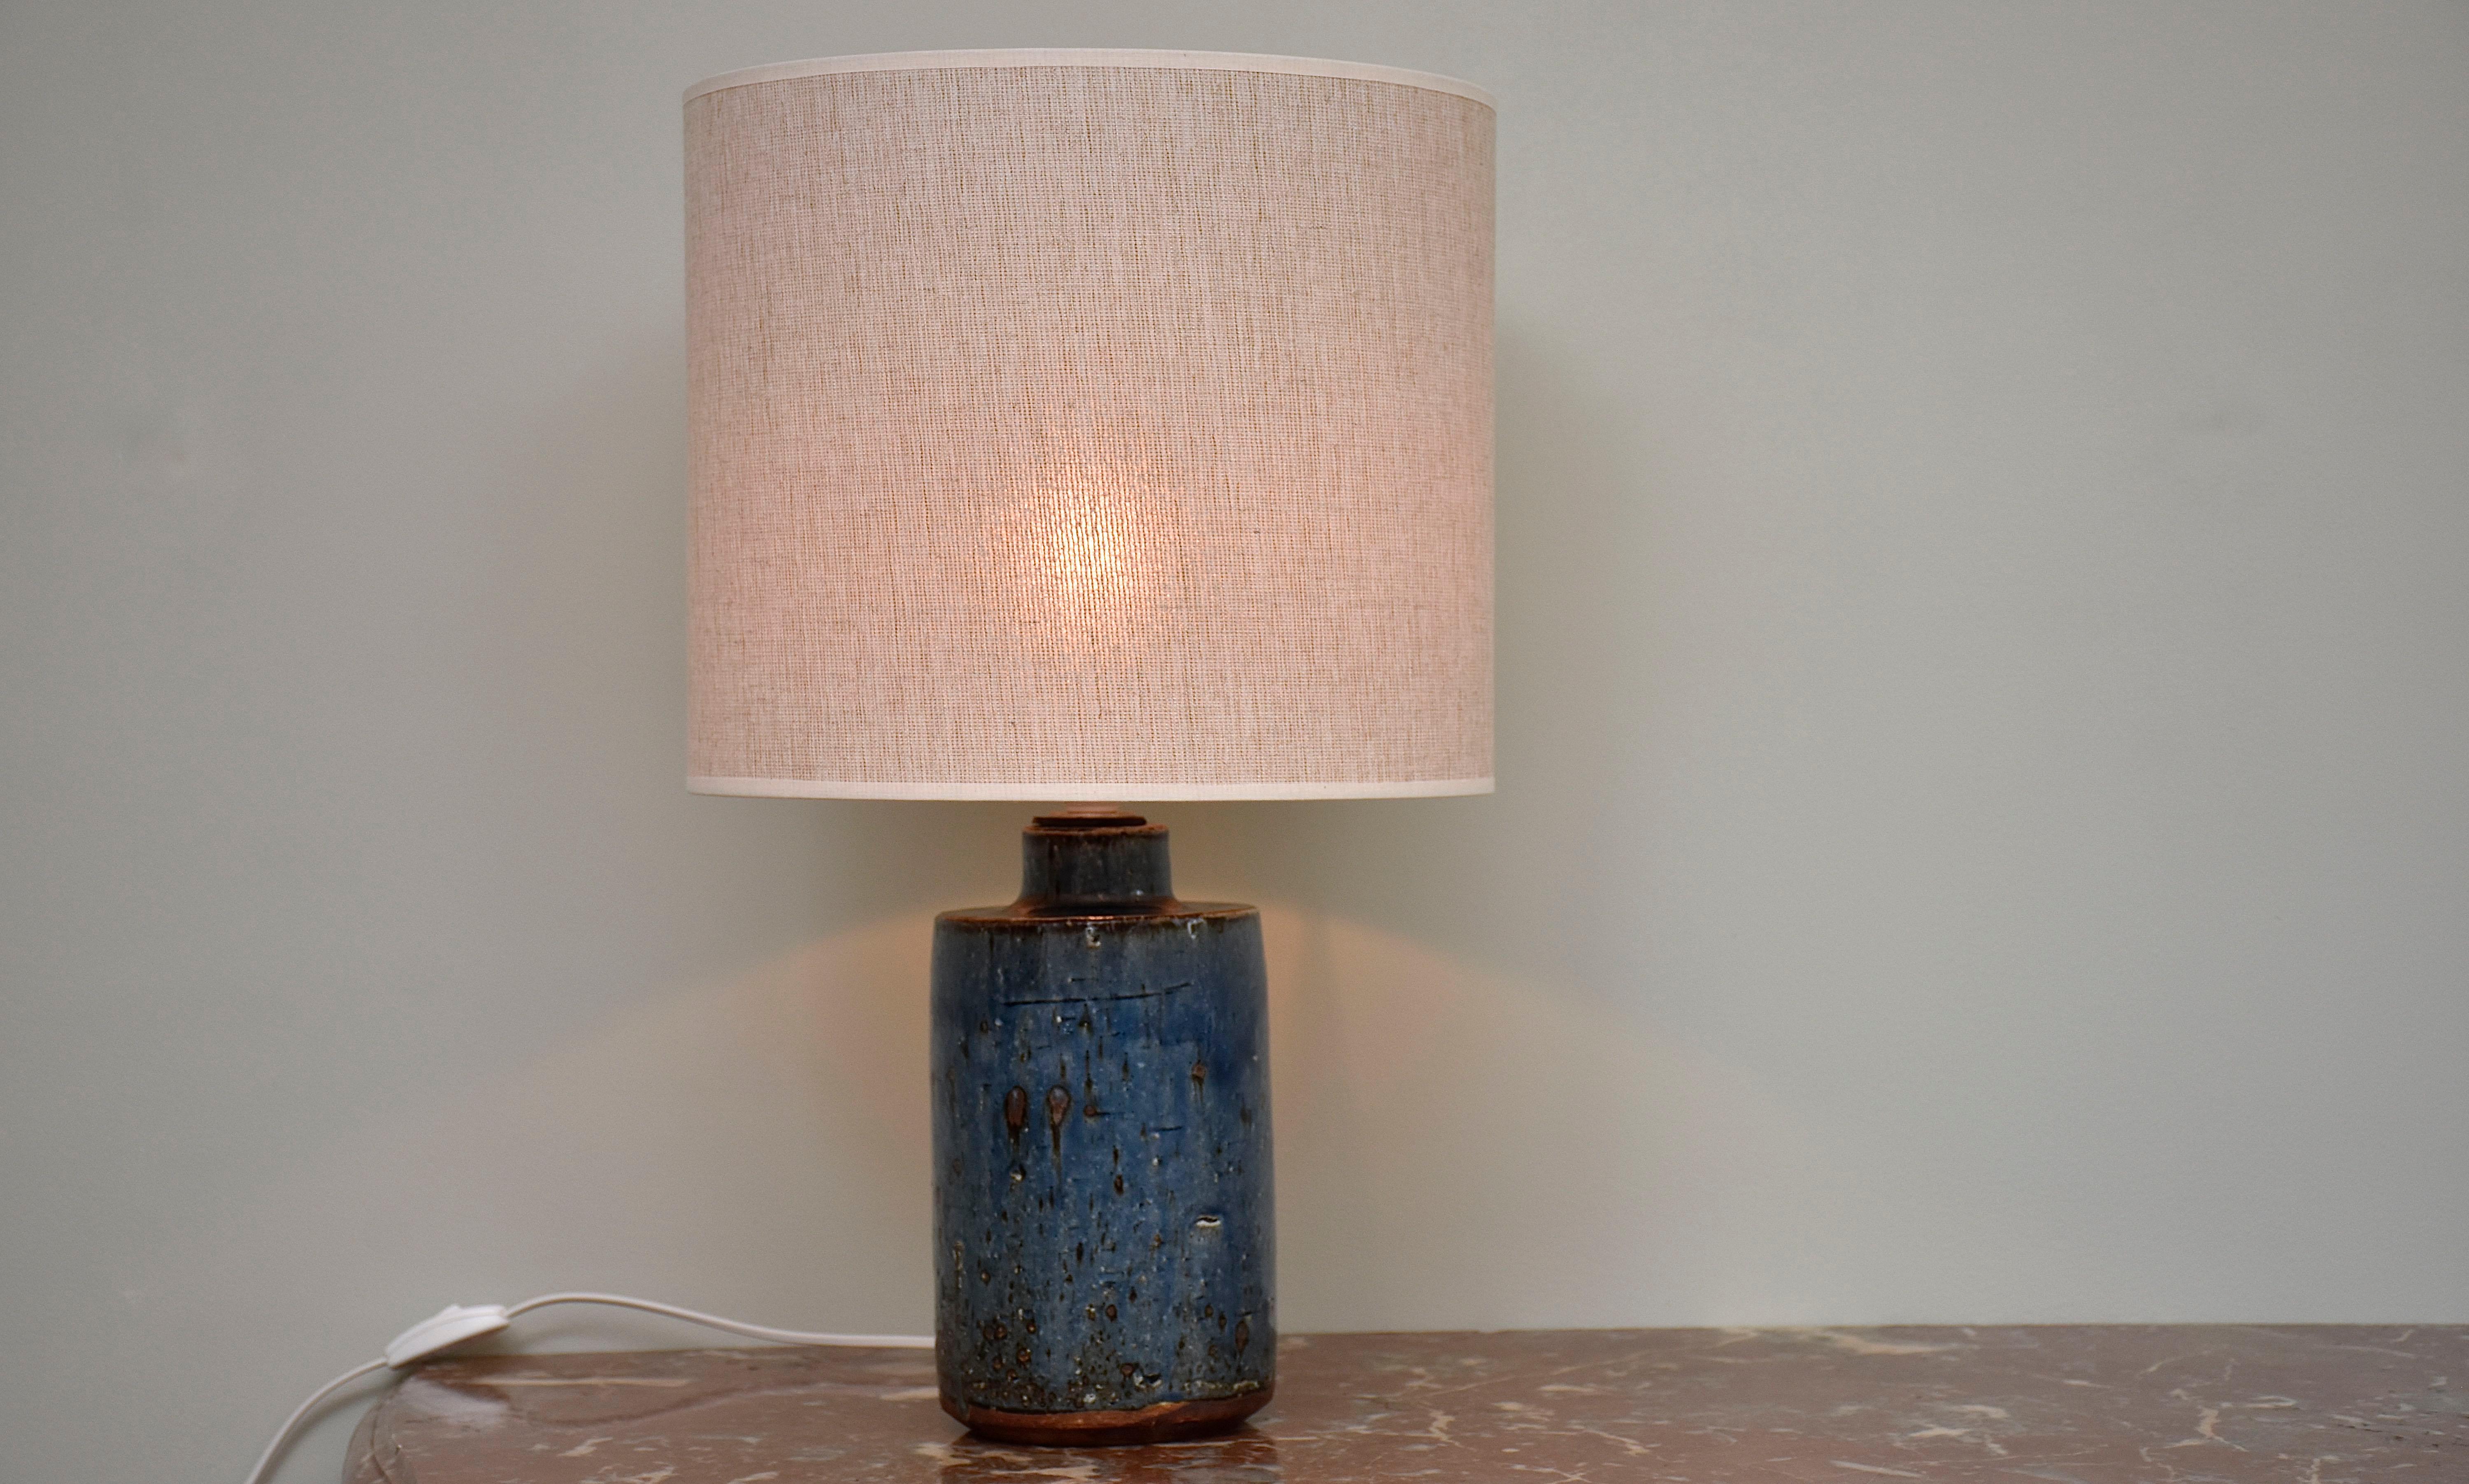 A beautiful blue ceramic stoneware table lamp designed and handmade by Marianne Westmann, Swedish designer and ceramicist.
The lamp was made for the famous Rorstrand ceramic factory in Sweden.
With 1x light.
Signed at the bottom.
Lampshade is new